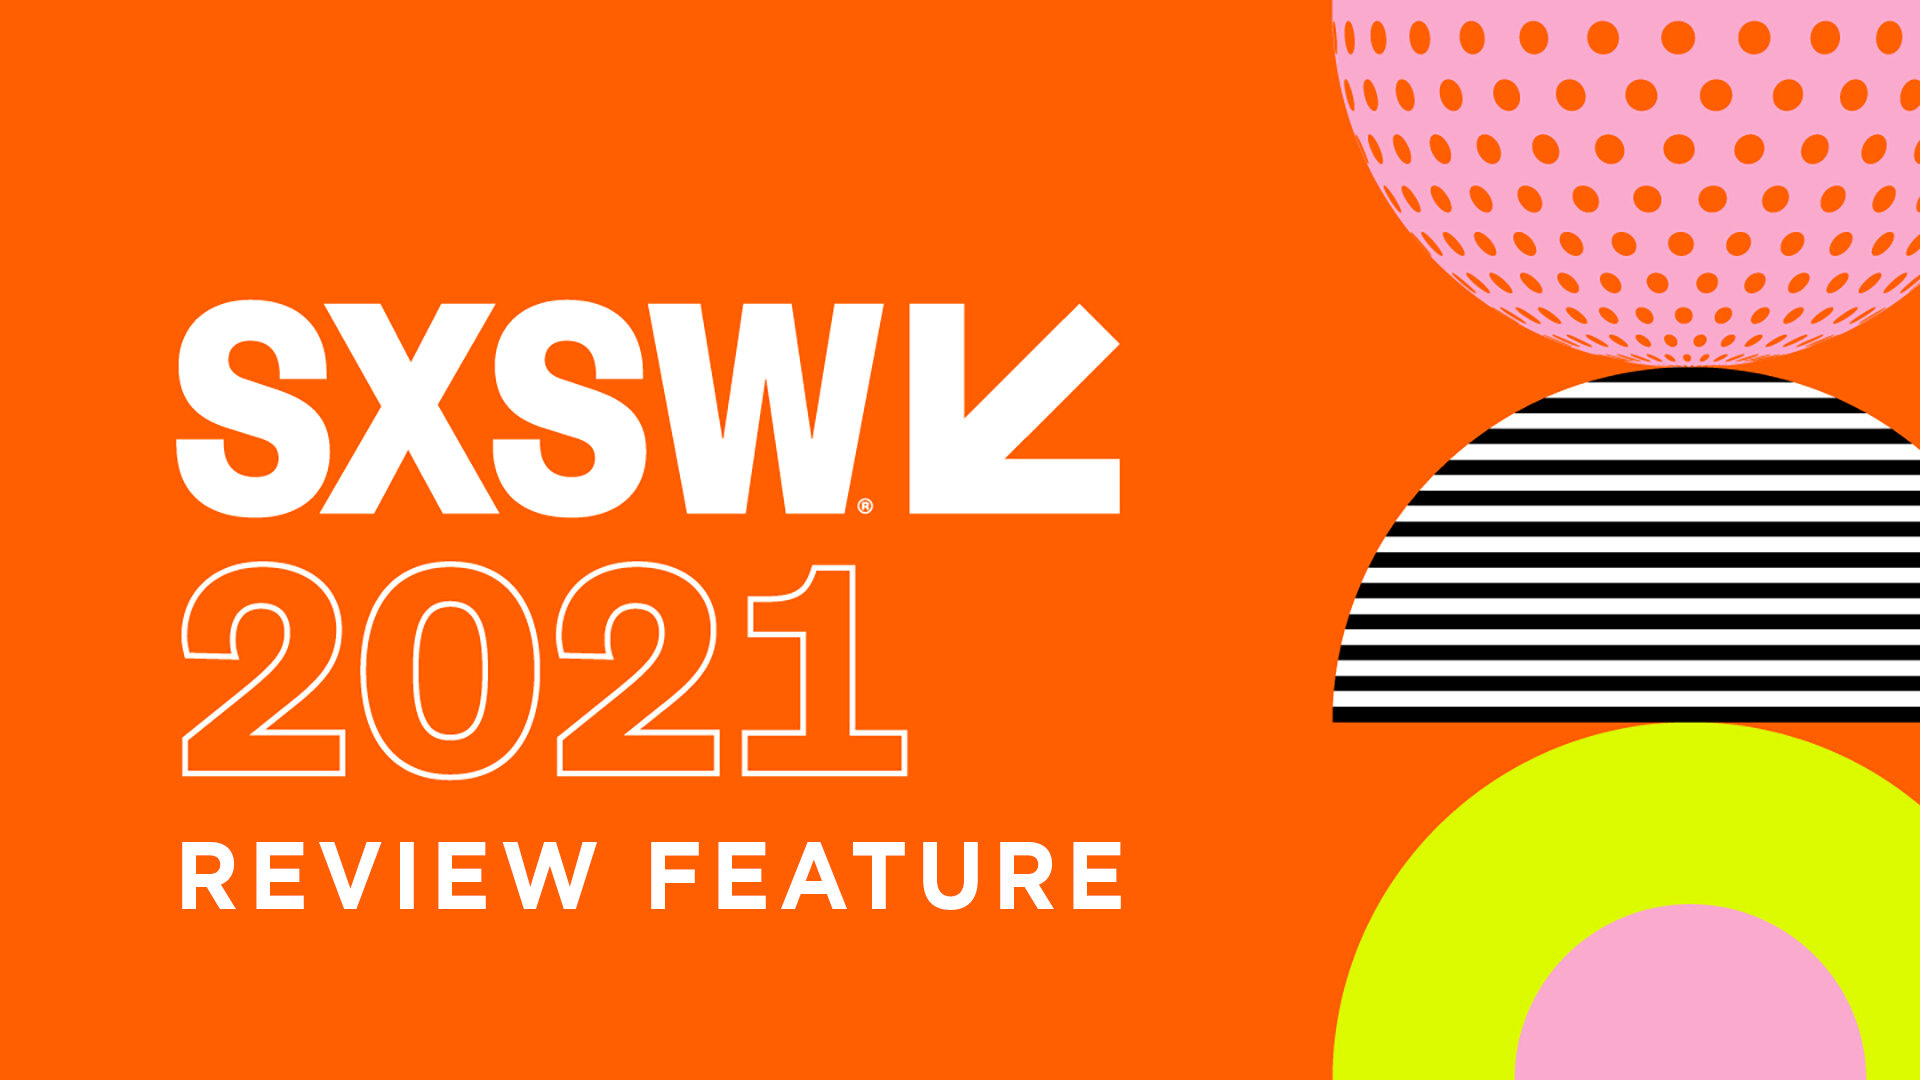 SXSW Online 2021 Review Feature — Cinema As We Know It